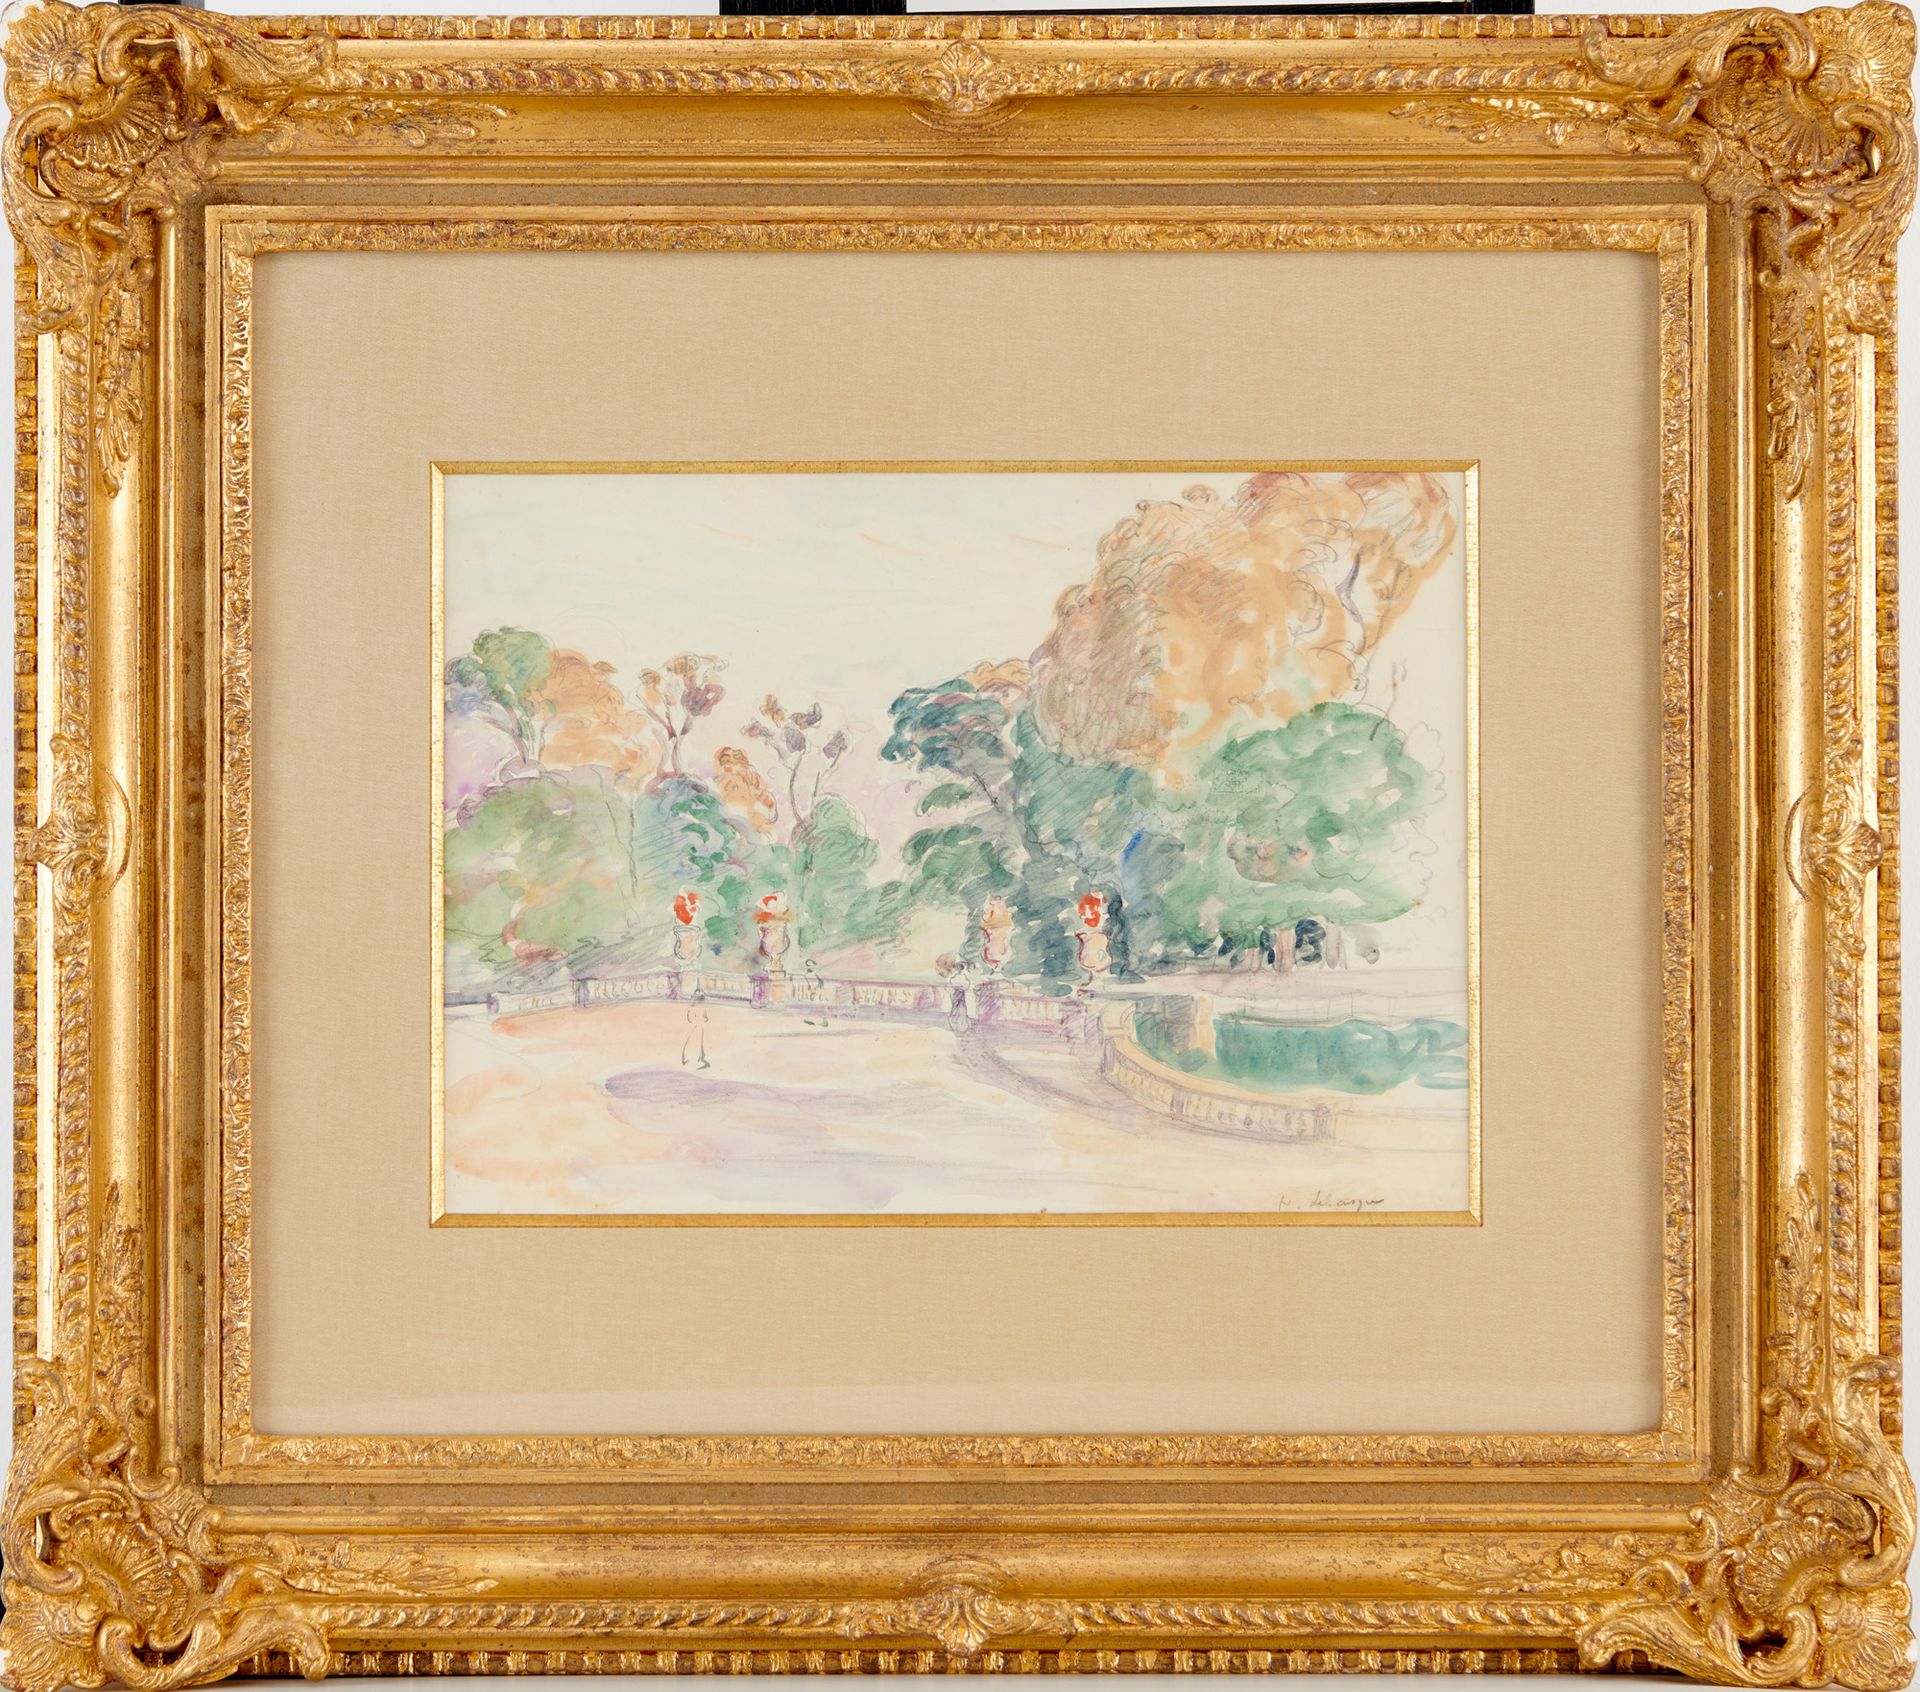 Null Henri LEBASQUE 1865 - 1937

ANIMATED VIEW OF A PUBLIC GARDEN

Watercolor dr&hellip;